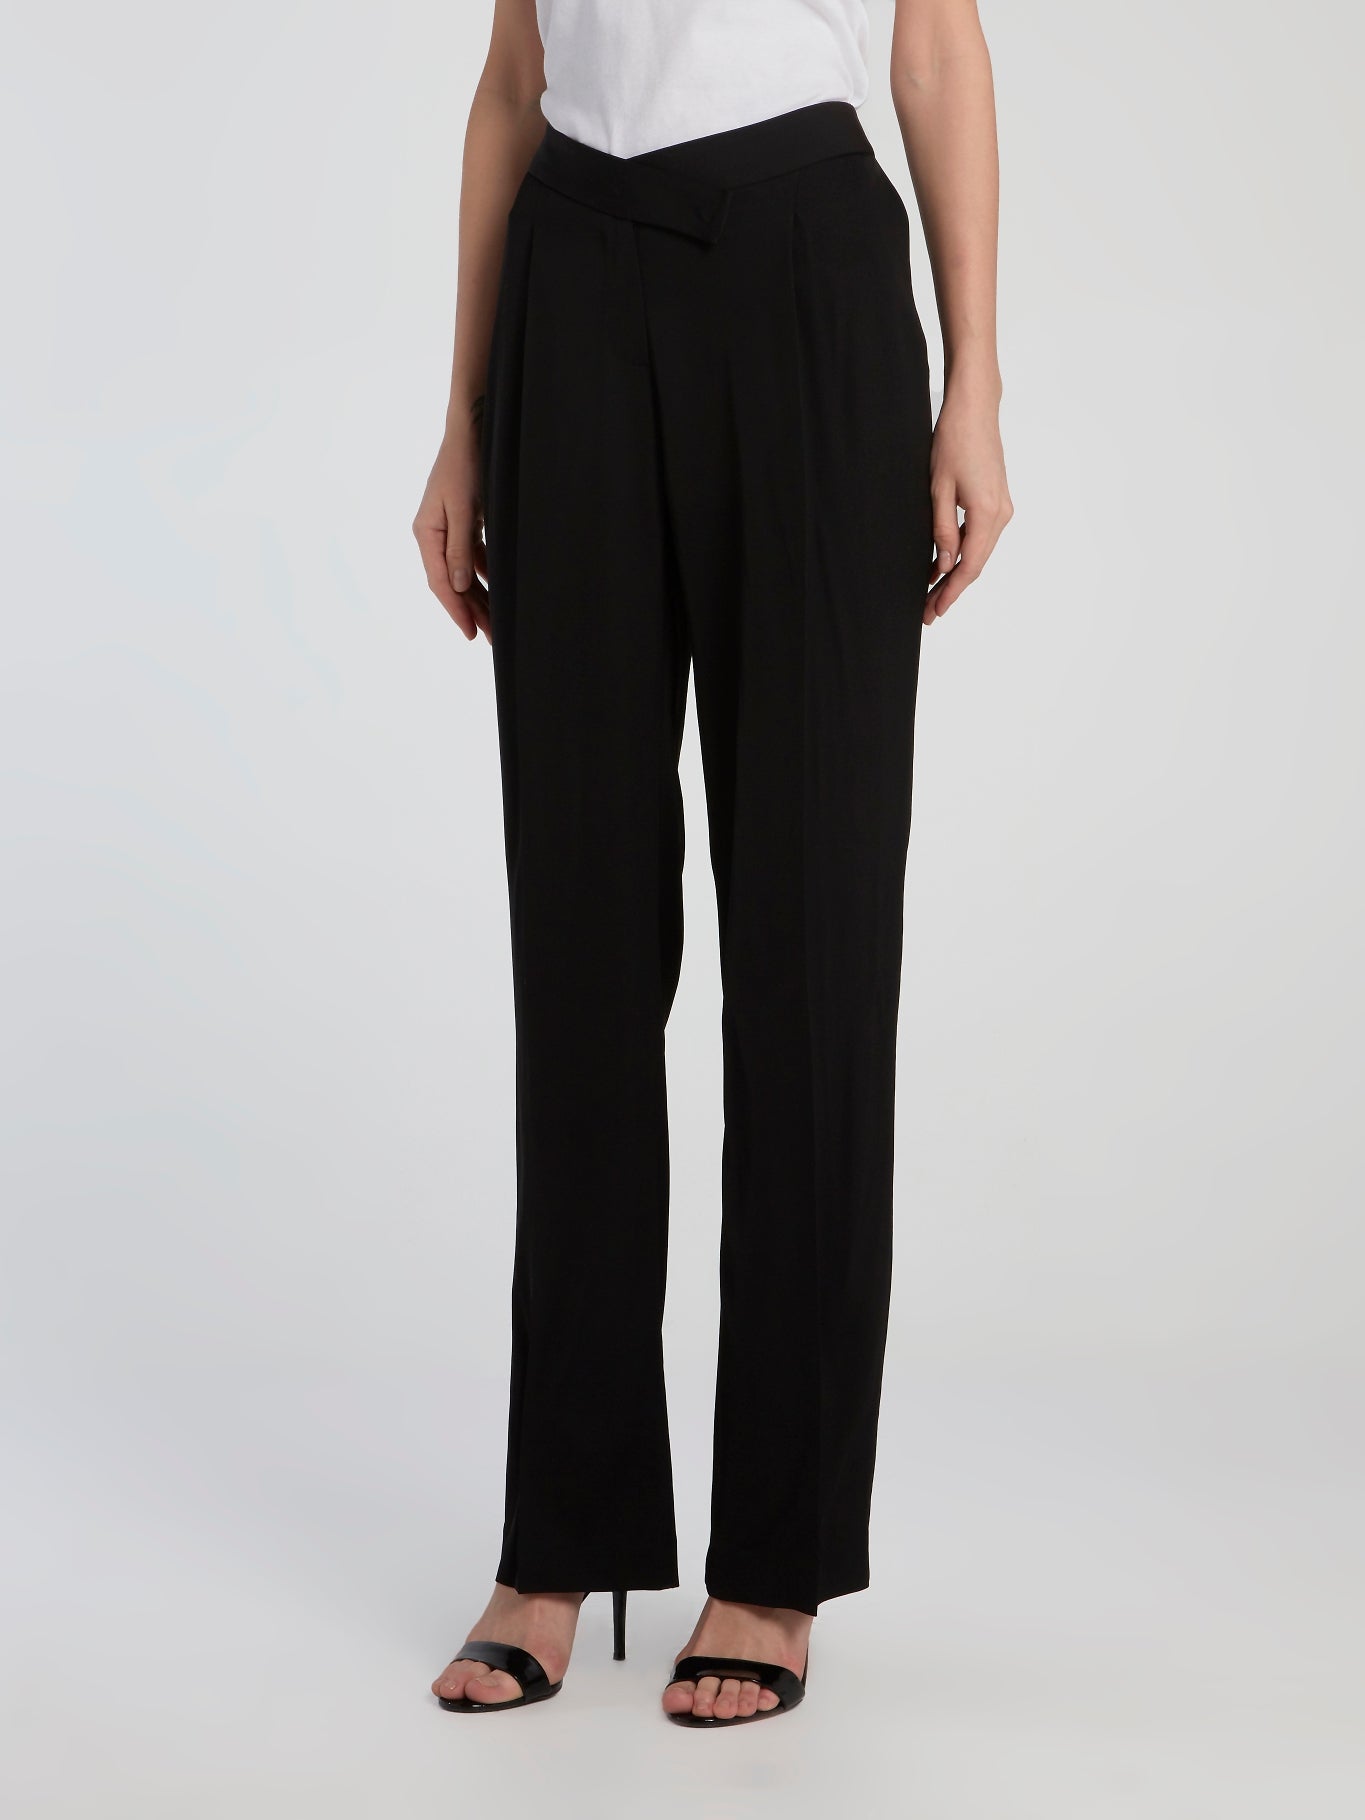 Black Belted Pegged Pants